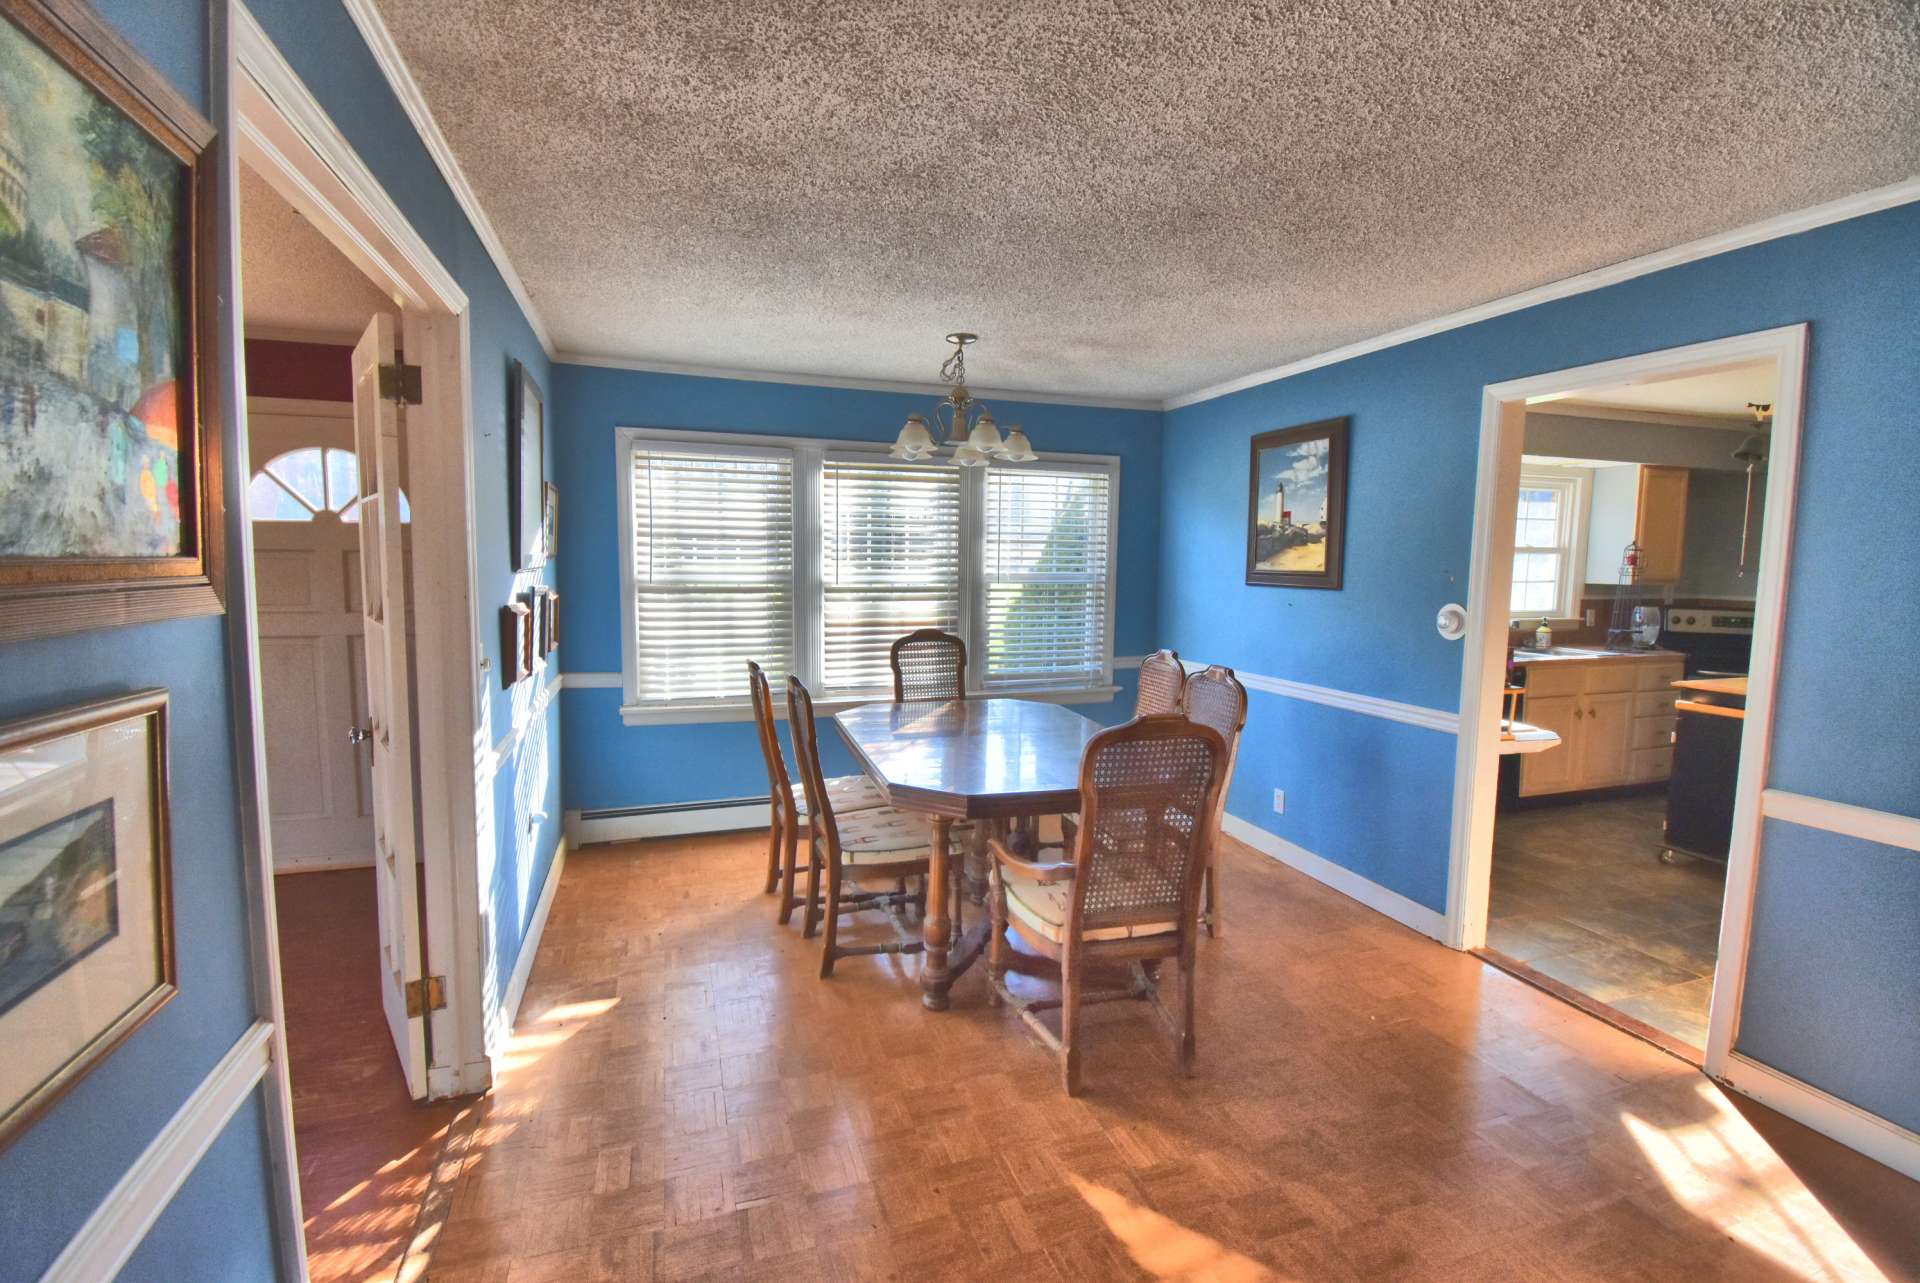 A spacious light filled dining room has a parquet wood floor and easy access to and from the kitchen and living rooms.